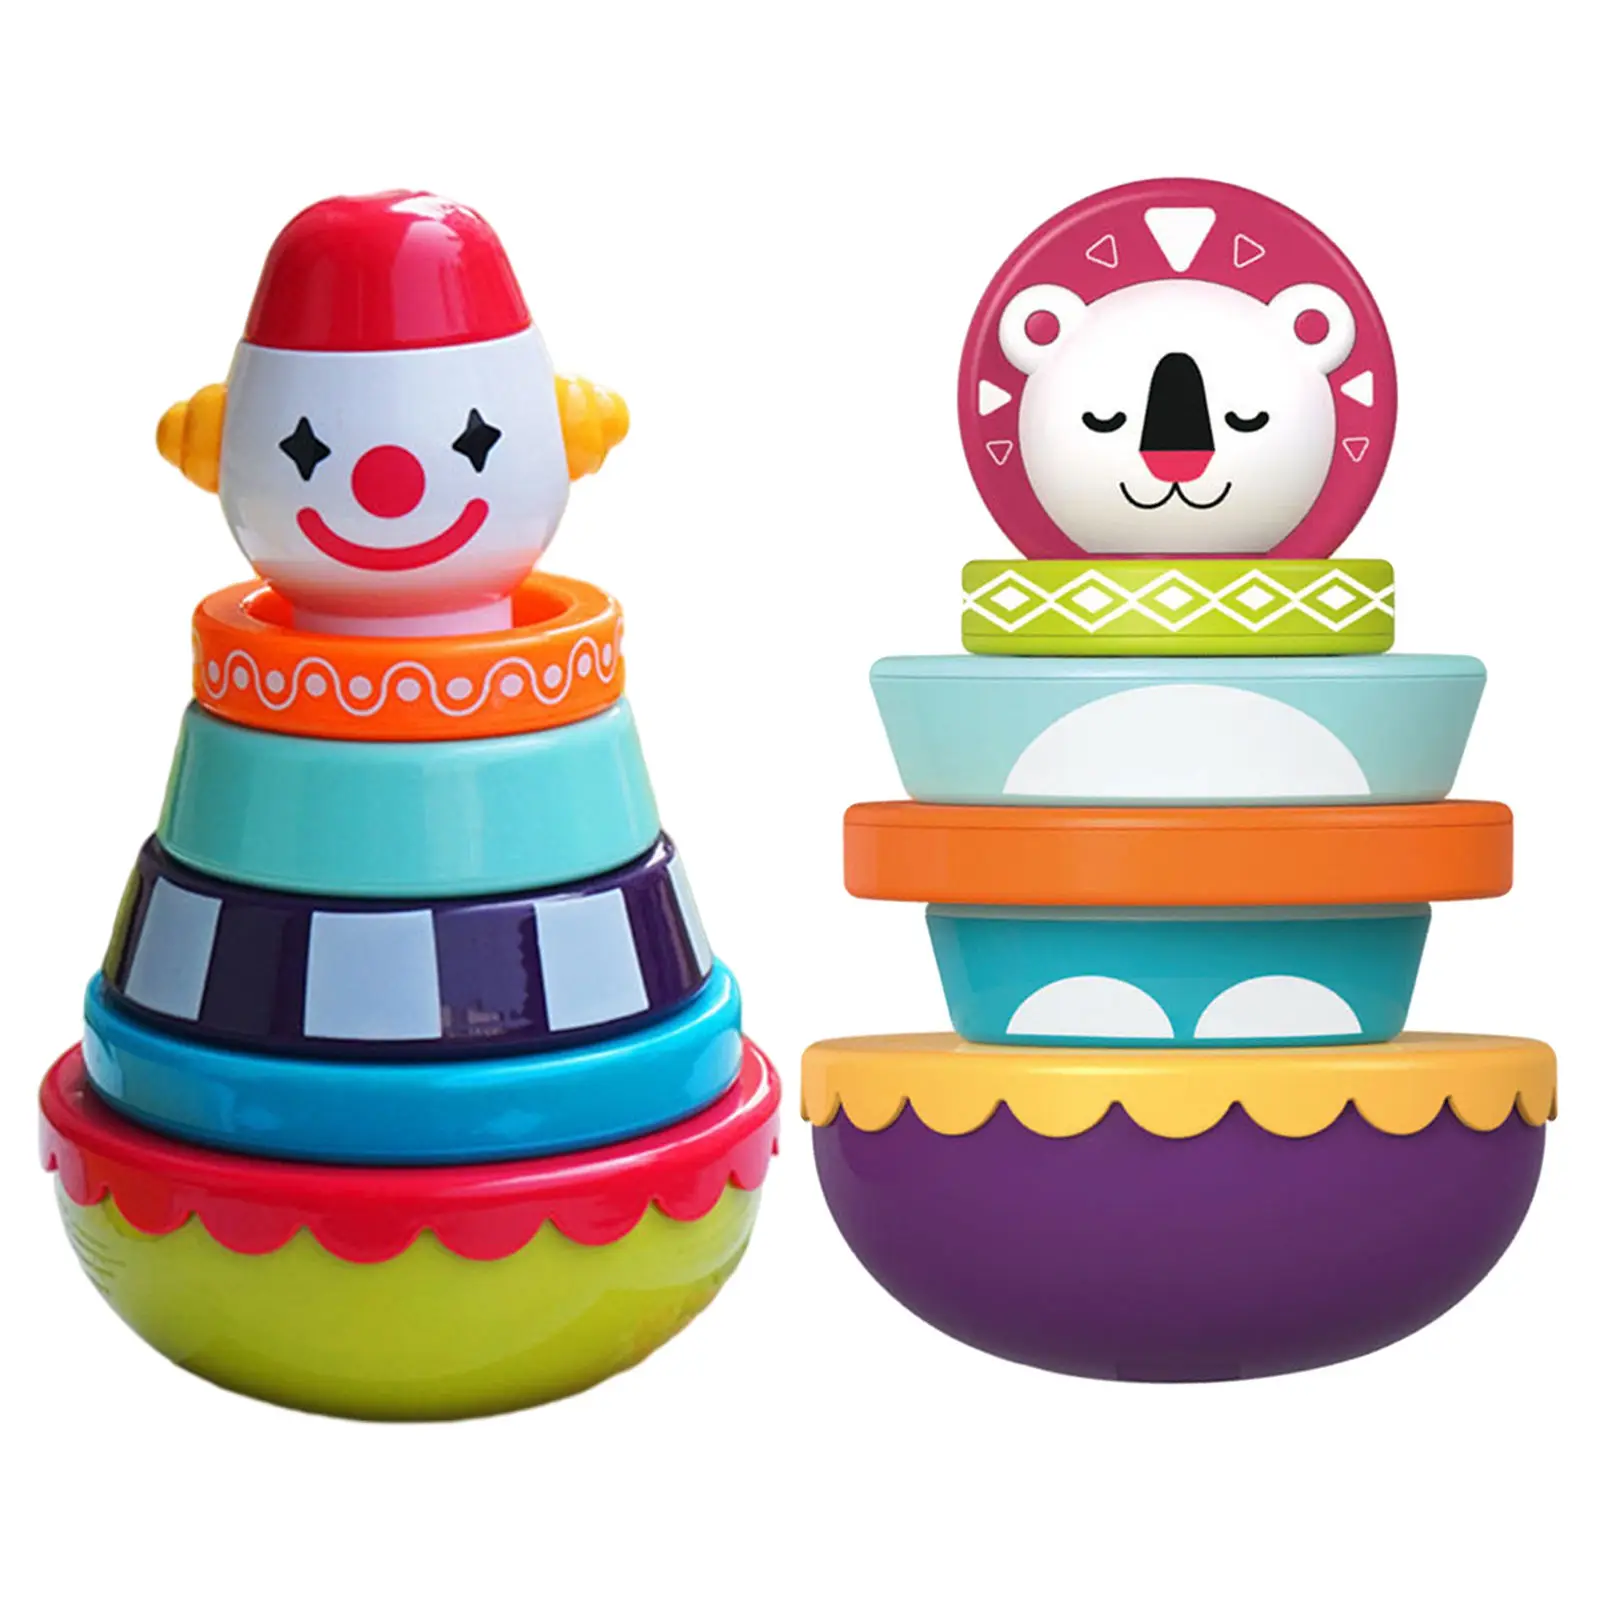 Stacking Rings Weeble Wobble Toys Tumbler Sensory Toys for 3,6,9,12 Months Kids Gifts